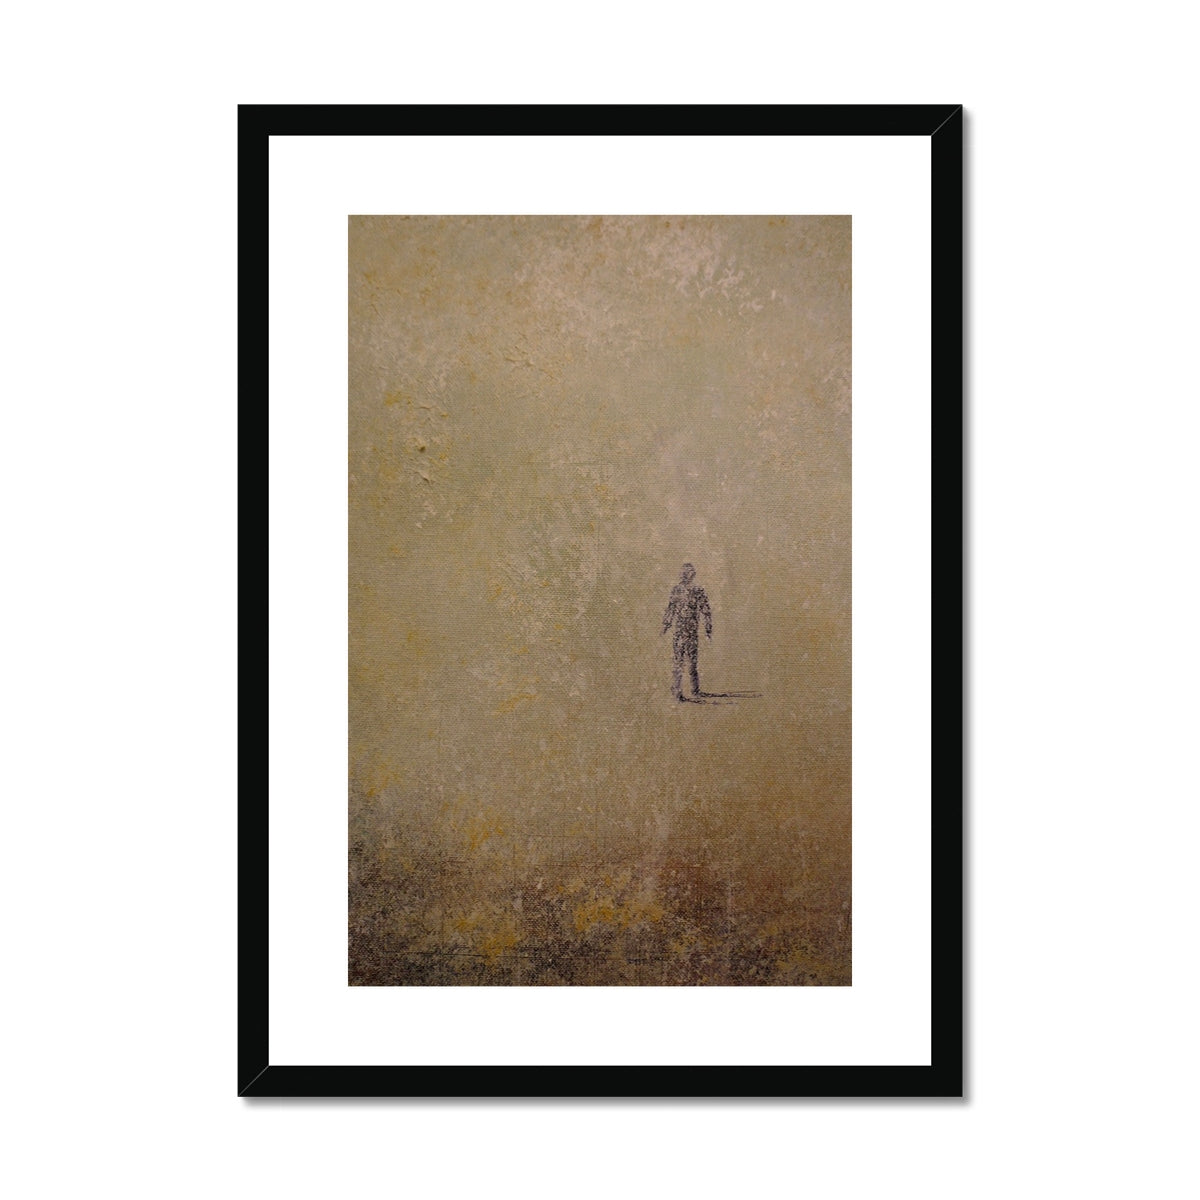 Into The Munro Mist Painting | Framed & Mounted Prints From Scotland-Framed & Mounted Prints-Abstract & Impressionistic Art Gallery-A2 Portrait-Black Frame-Paintings, Prints, Homeware, Art Gifts From Scotland By Scottish Artist Kevin Hunter